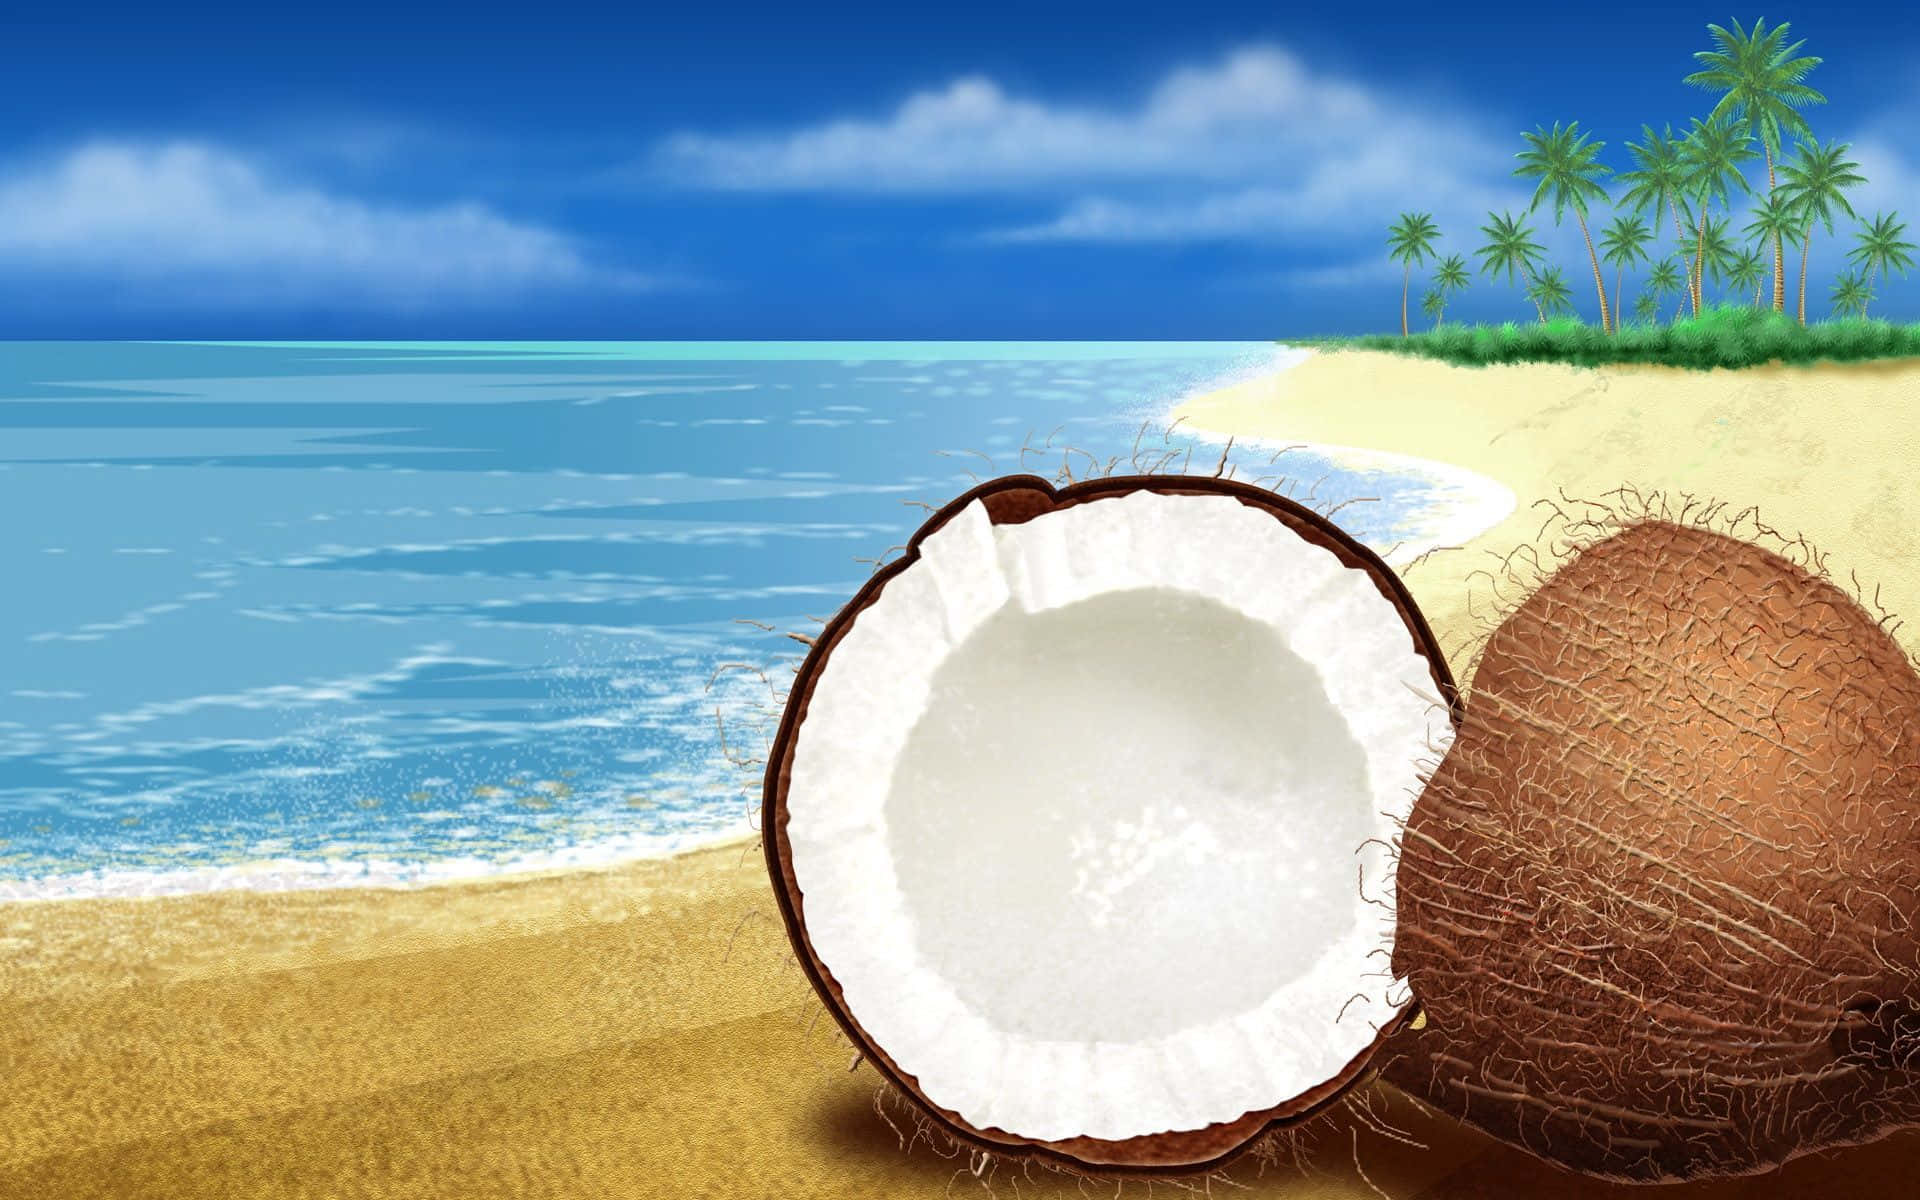 Enjoy the Cool Breeze of a Coconut Tree